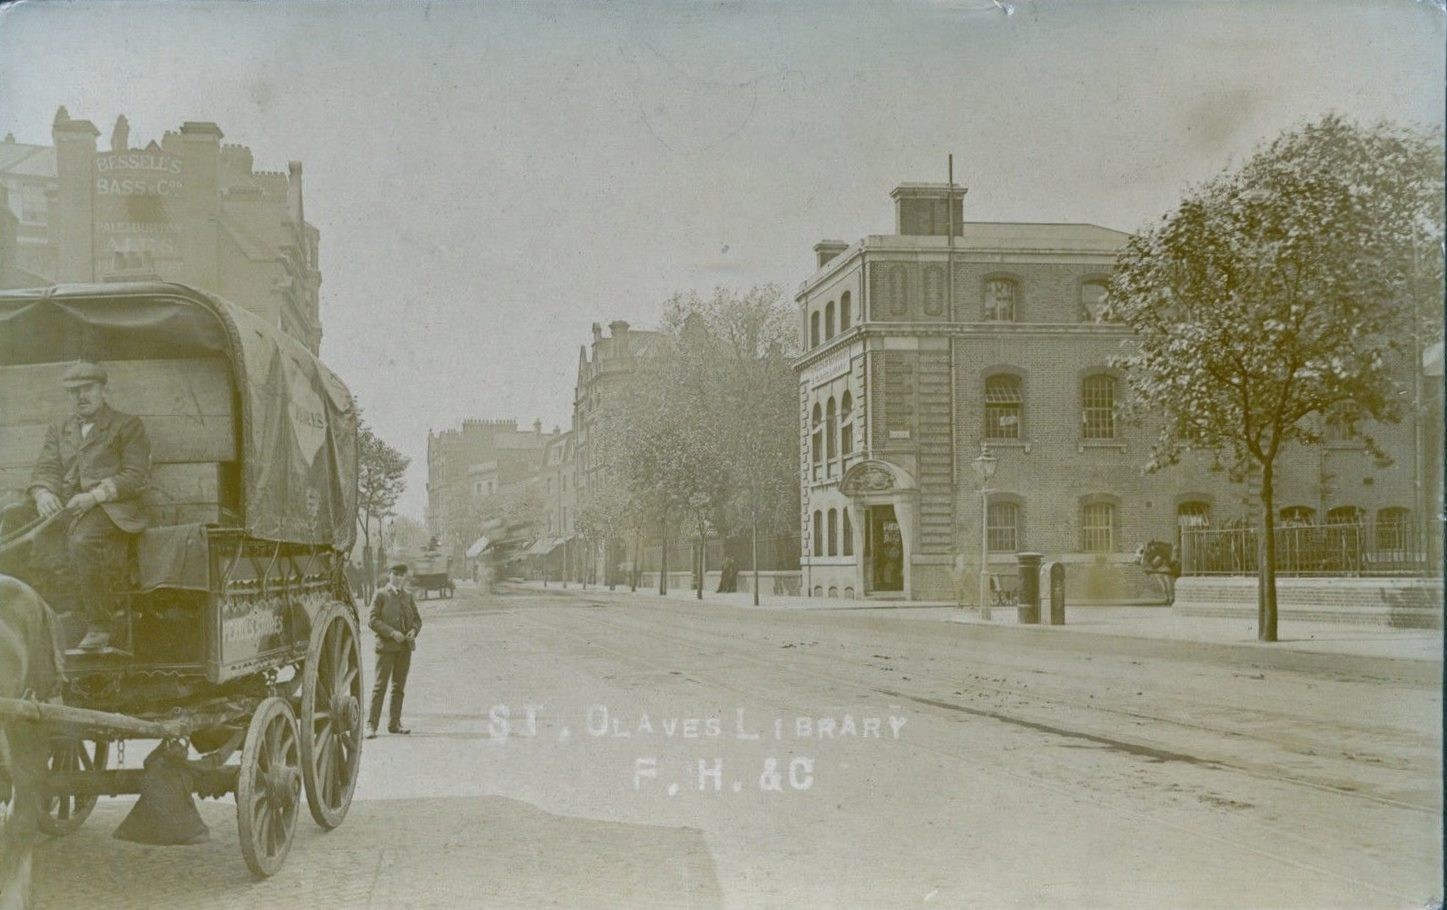 Tooley Street from Tower Bridge Road. The building to be seen here on the right hand corner of Tooley Street and Potter's Field was St.Olave's Library..jpg